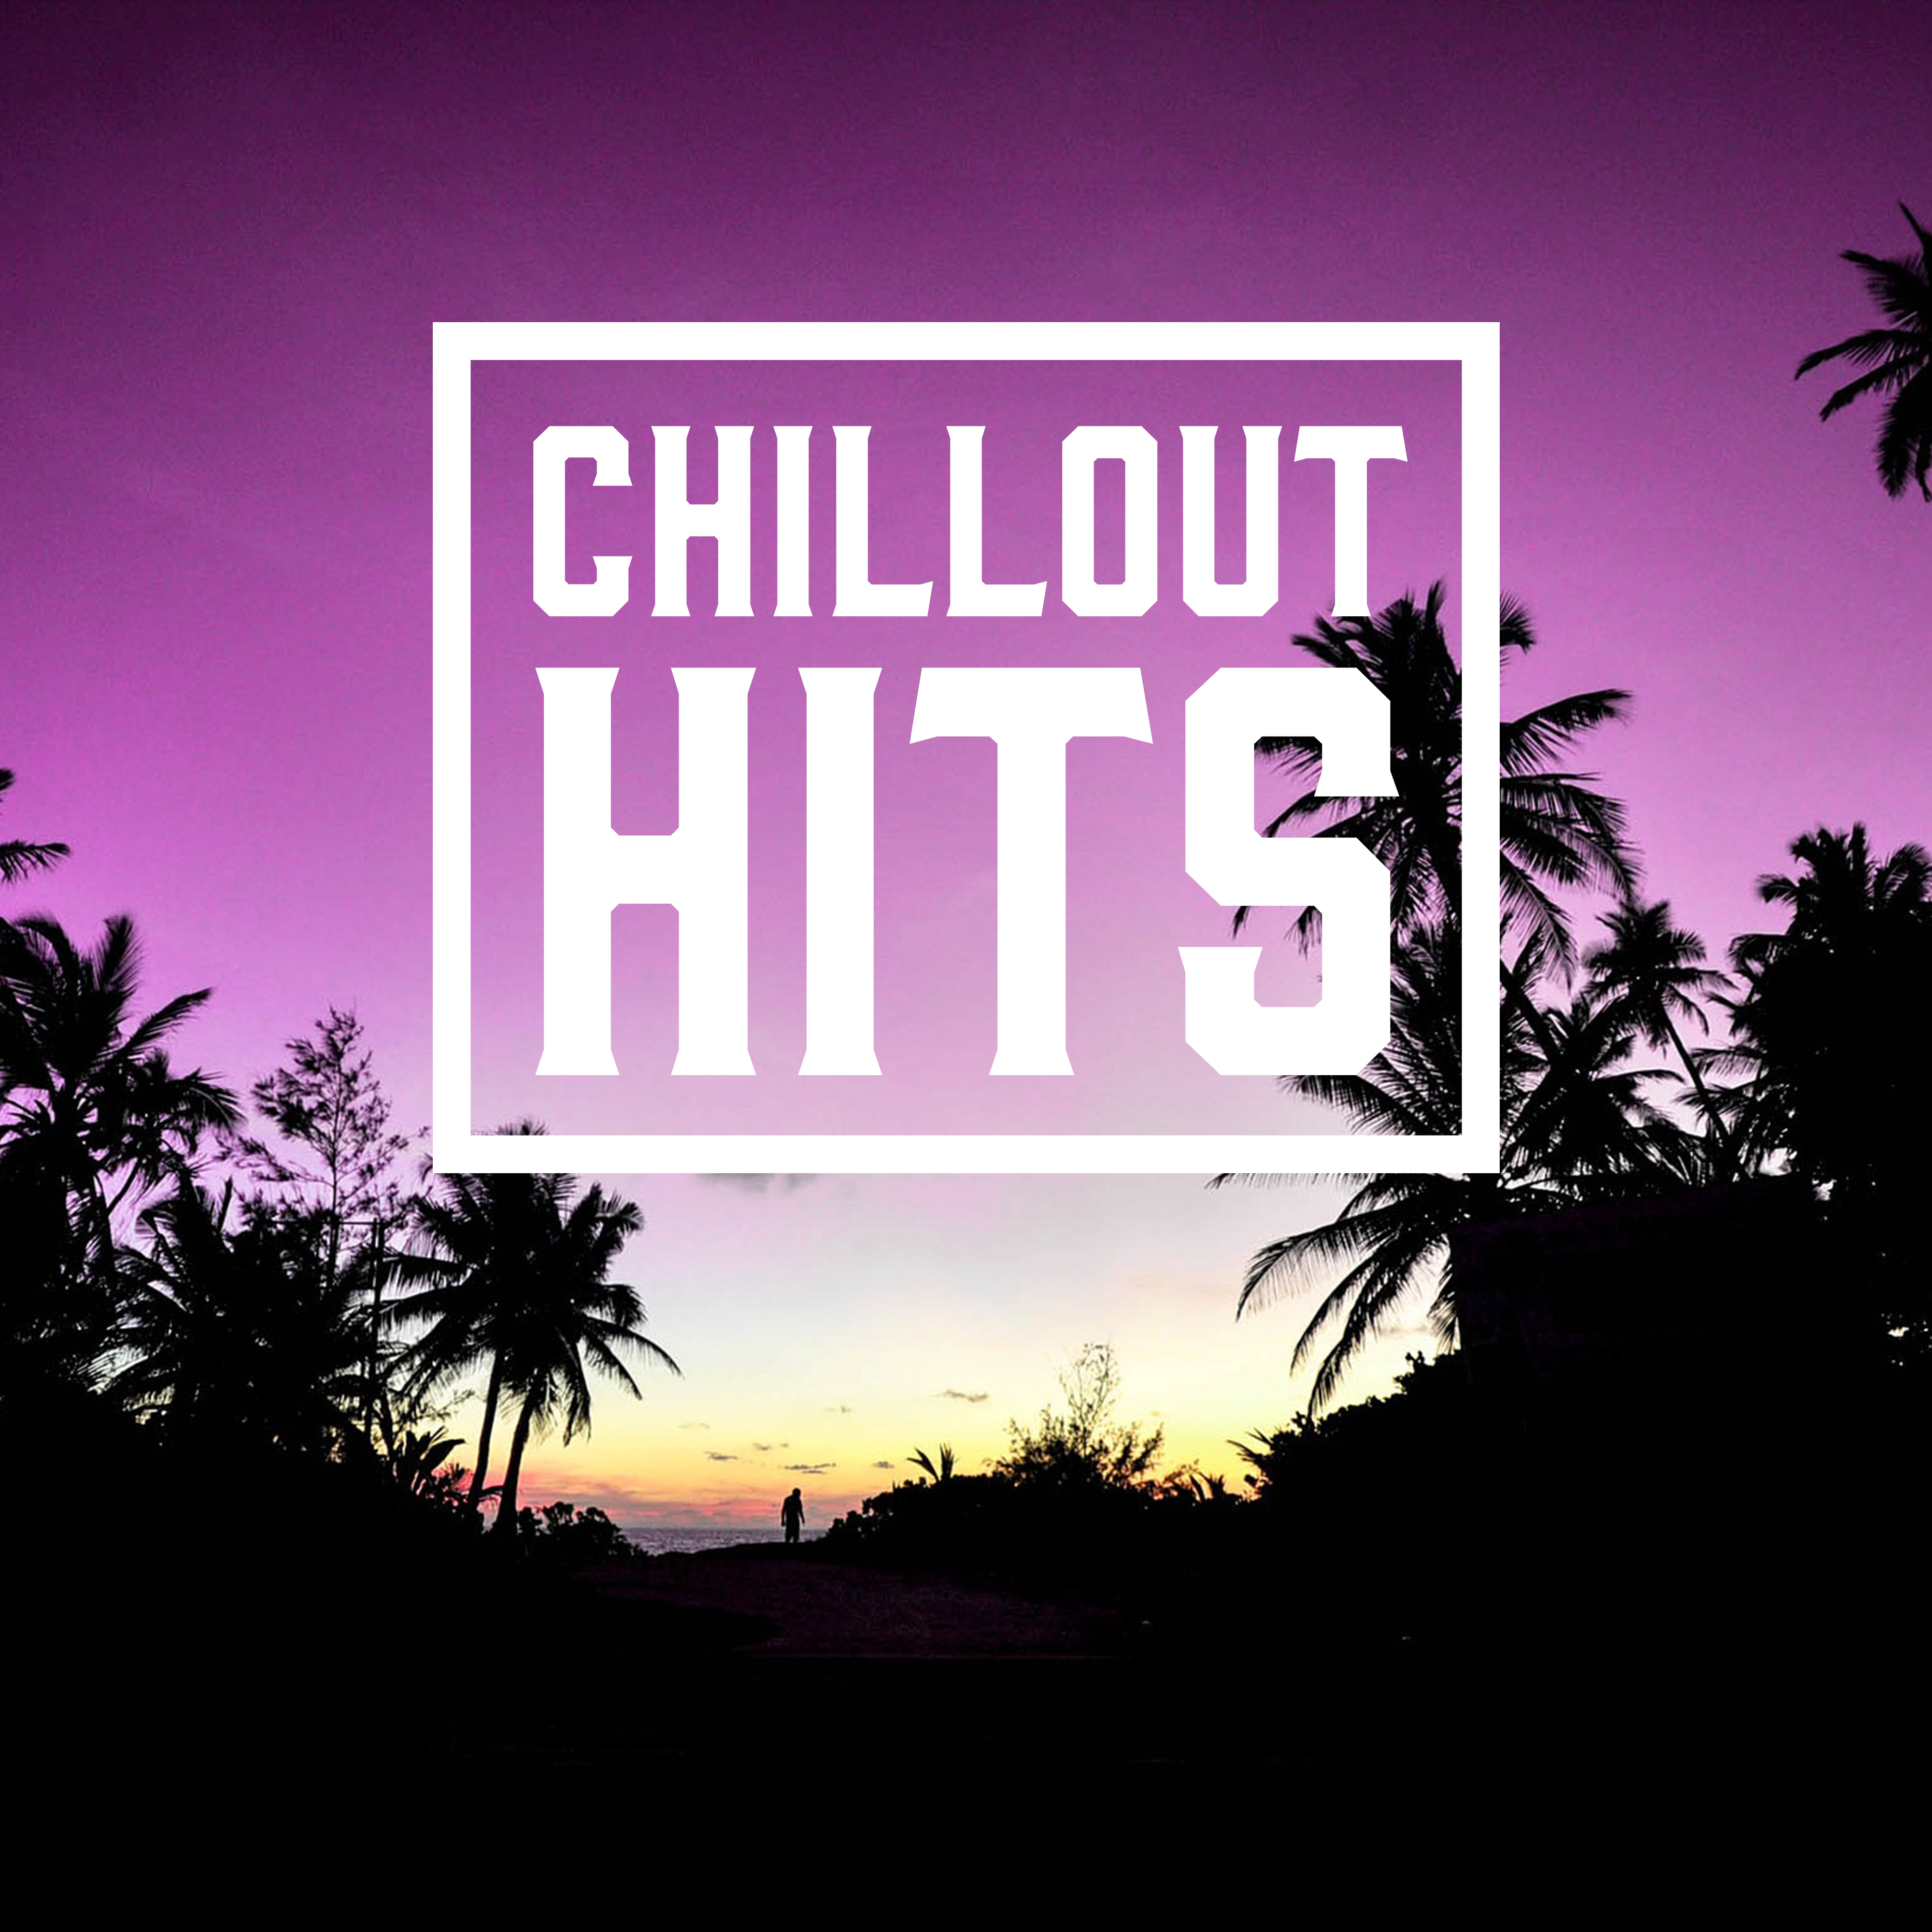 Chillout Hits – Hot Music, Beach Party, Deep Vibes, **** Chill Out, Deep Sun, Rest